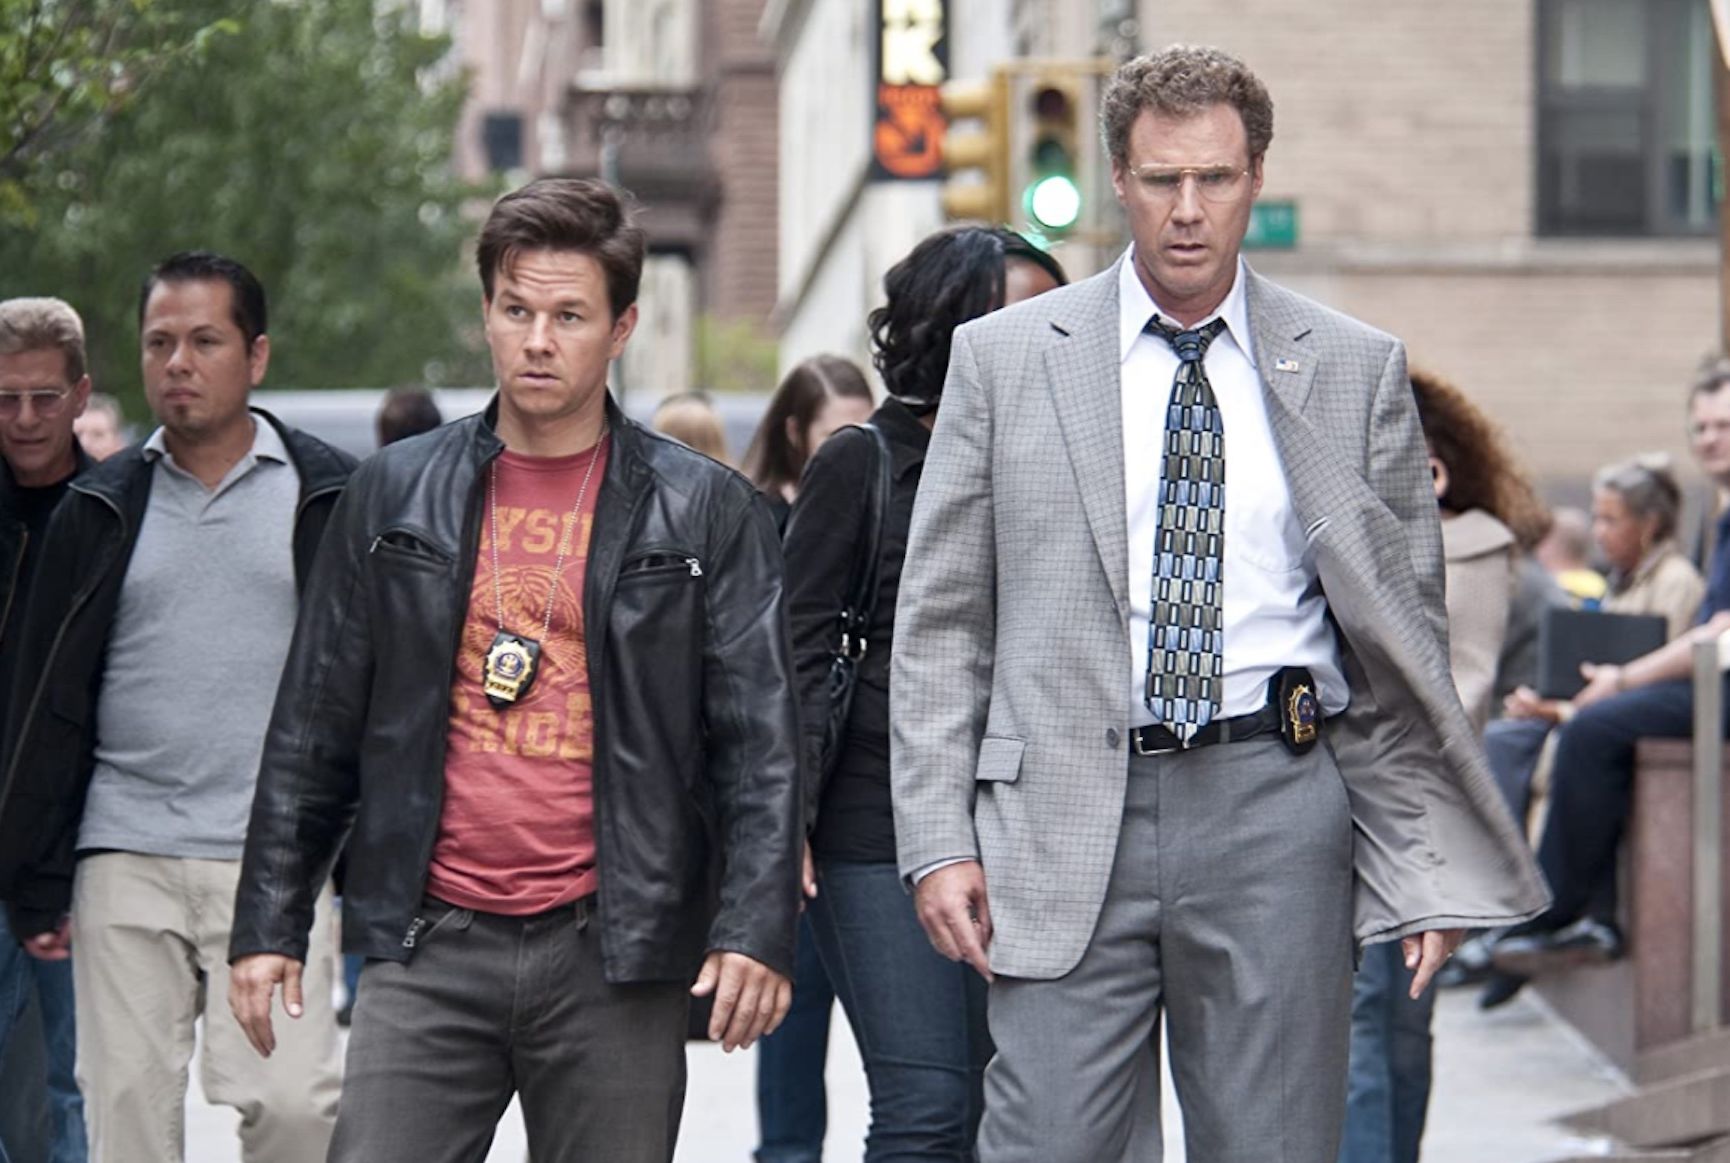 Mark Wahlberg (left) and Will Ferrell (right) walk down a busy street in The Other Guys.